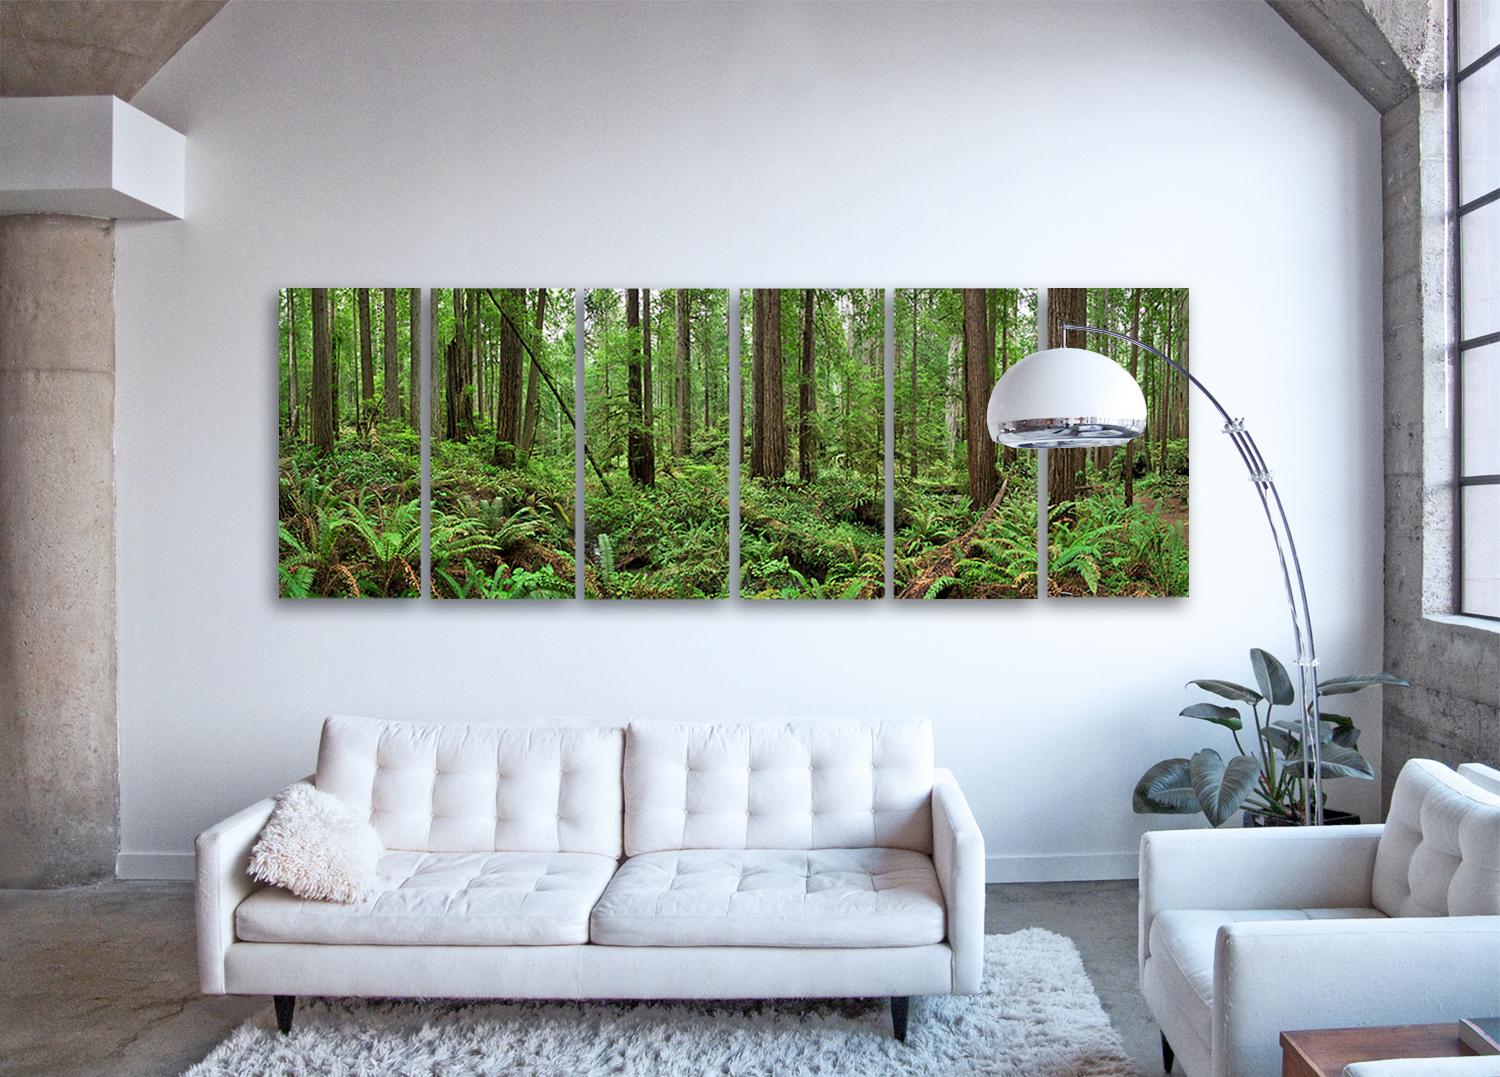 Redwoods (6 glass panels) - large format abstract nature forest panorama  - Print by Erik Pawassar